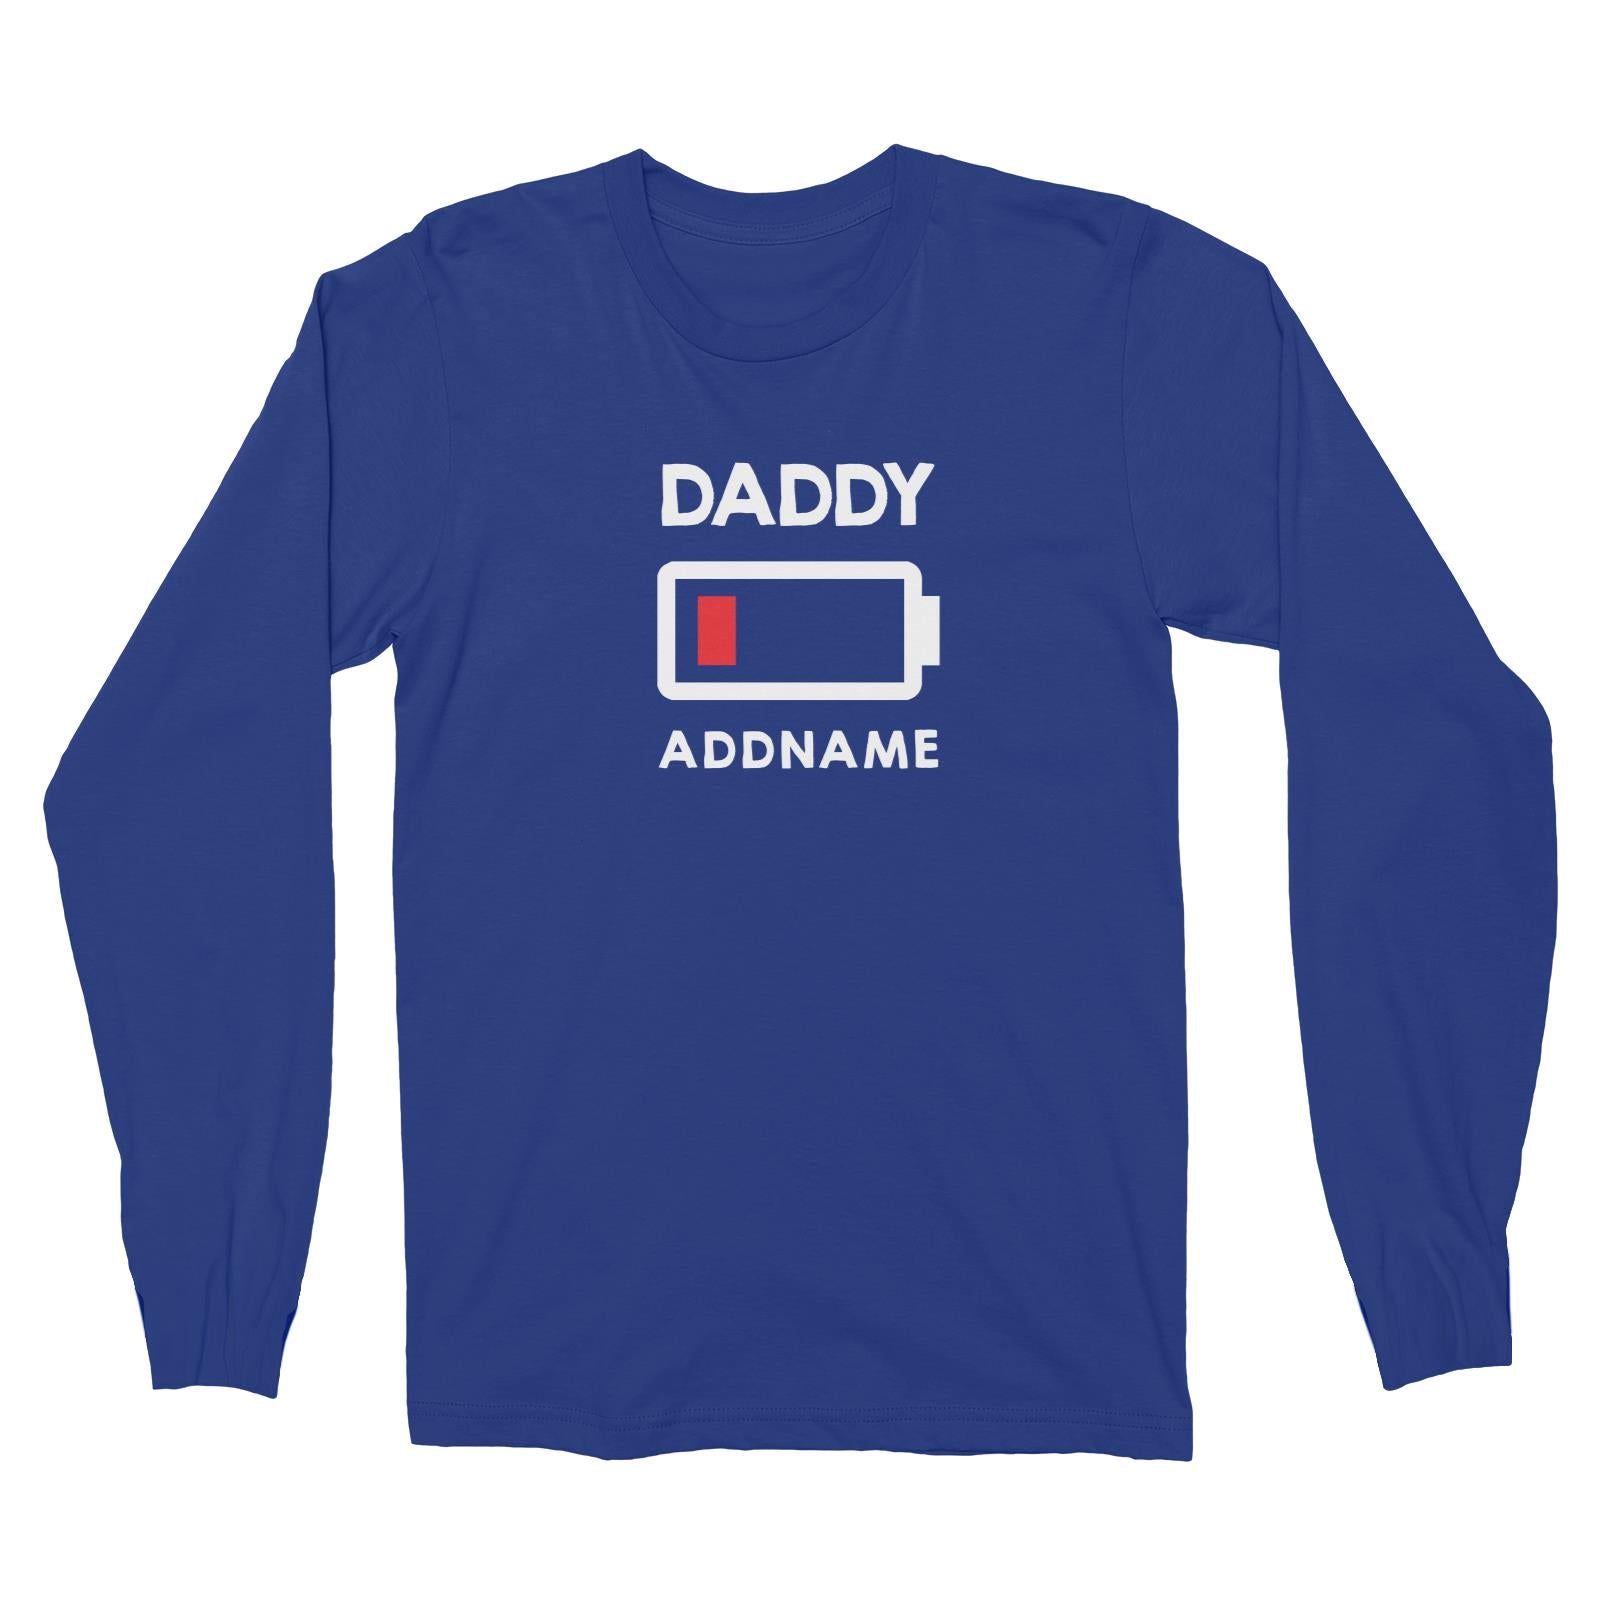 Battery Low Daddy Addname Long Sleeve Unisex T-Shirt  Matching Family Personalizable Designs